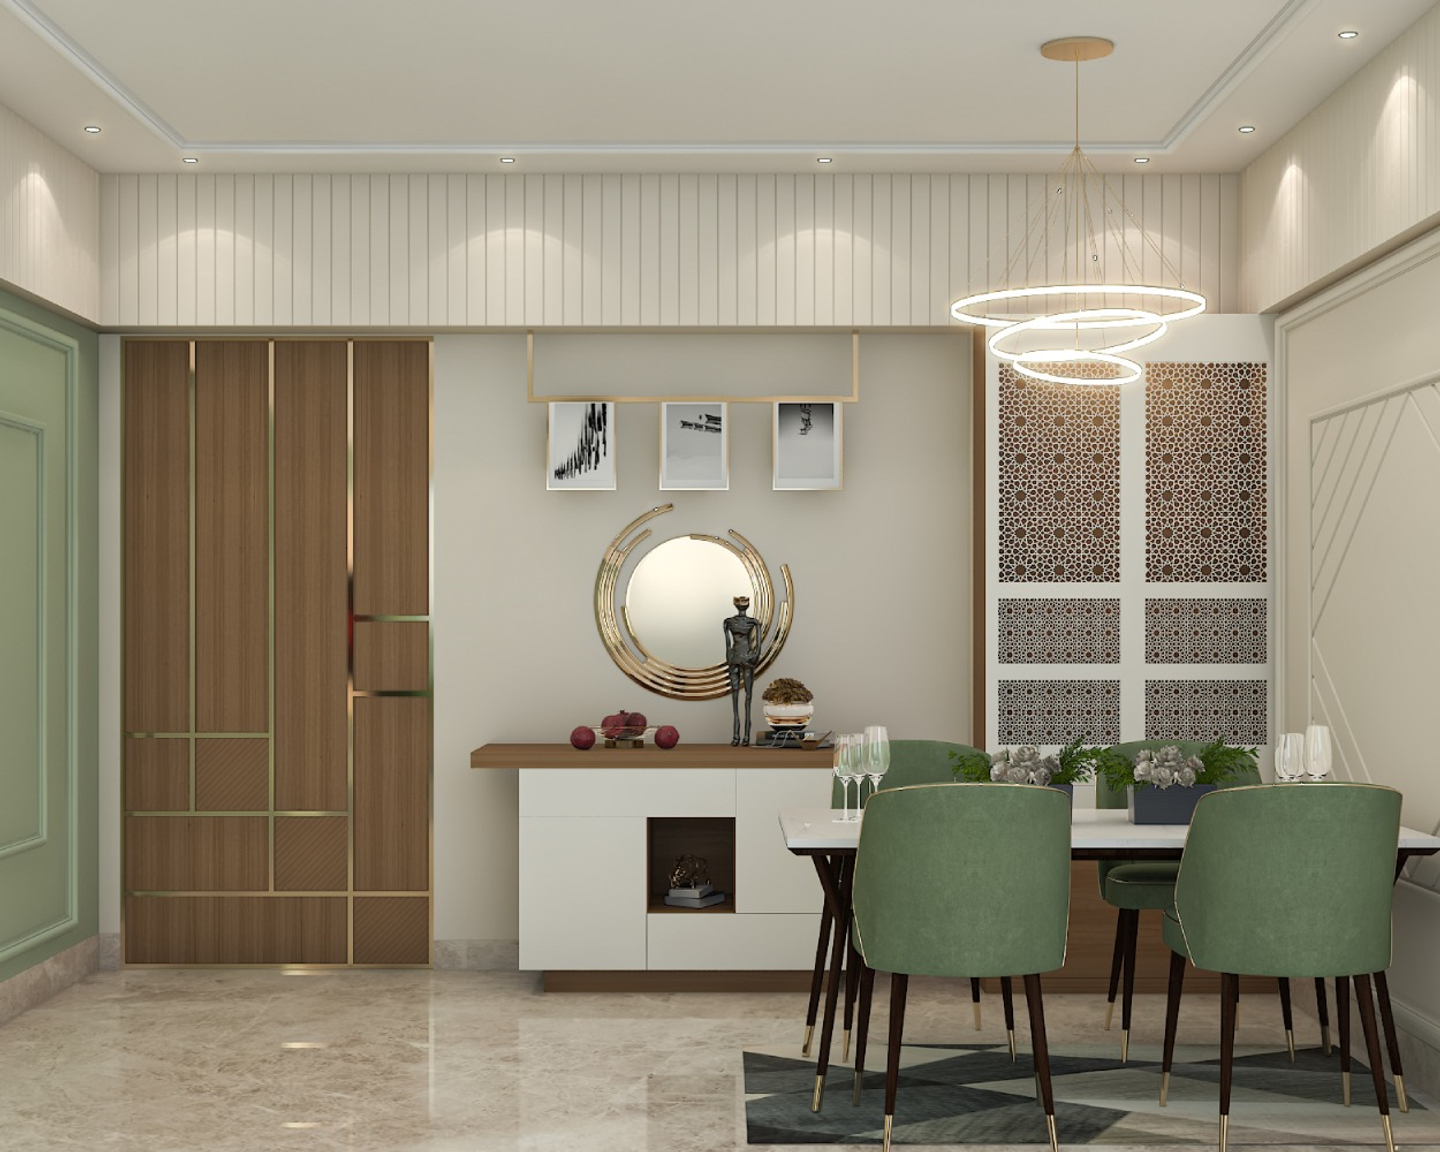 Contemporary Dining Room Design With A 4-Seater Table And Green Chairs